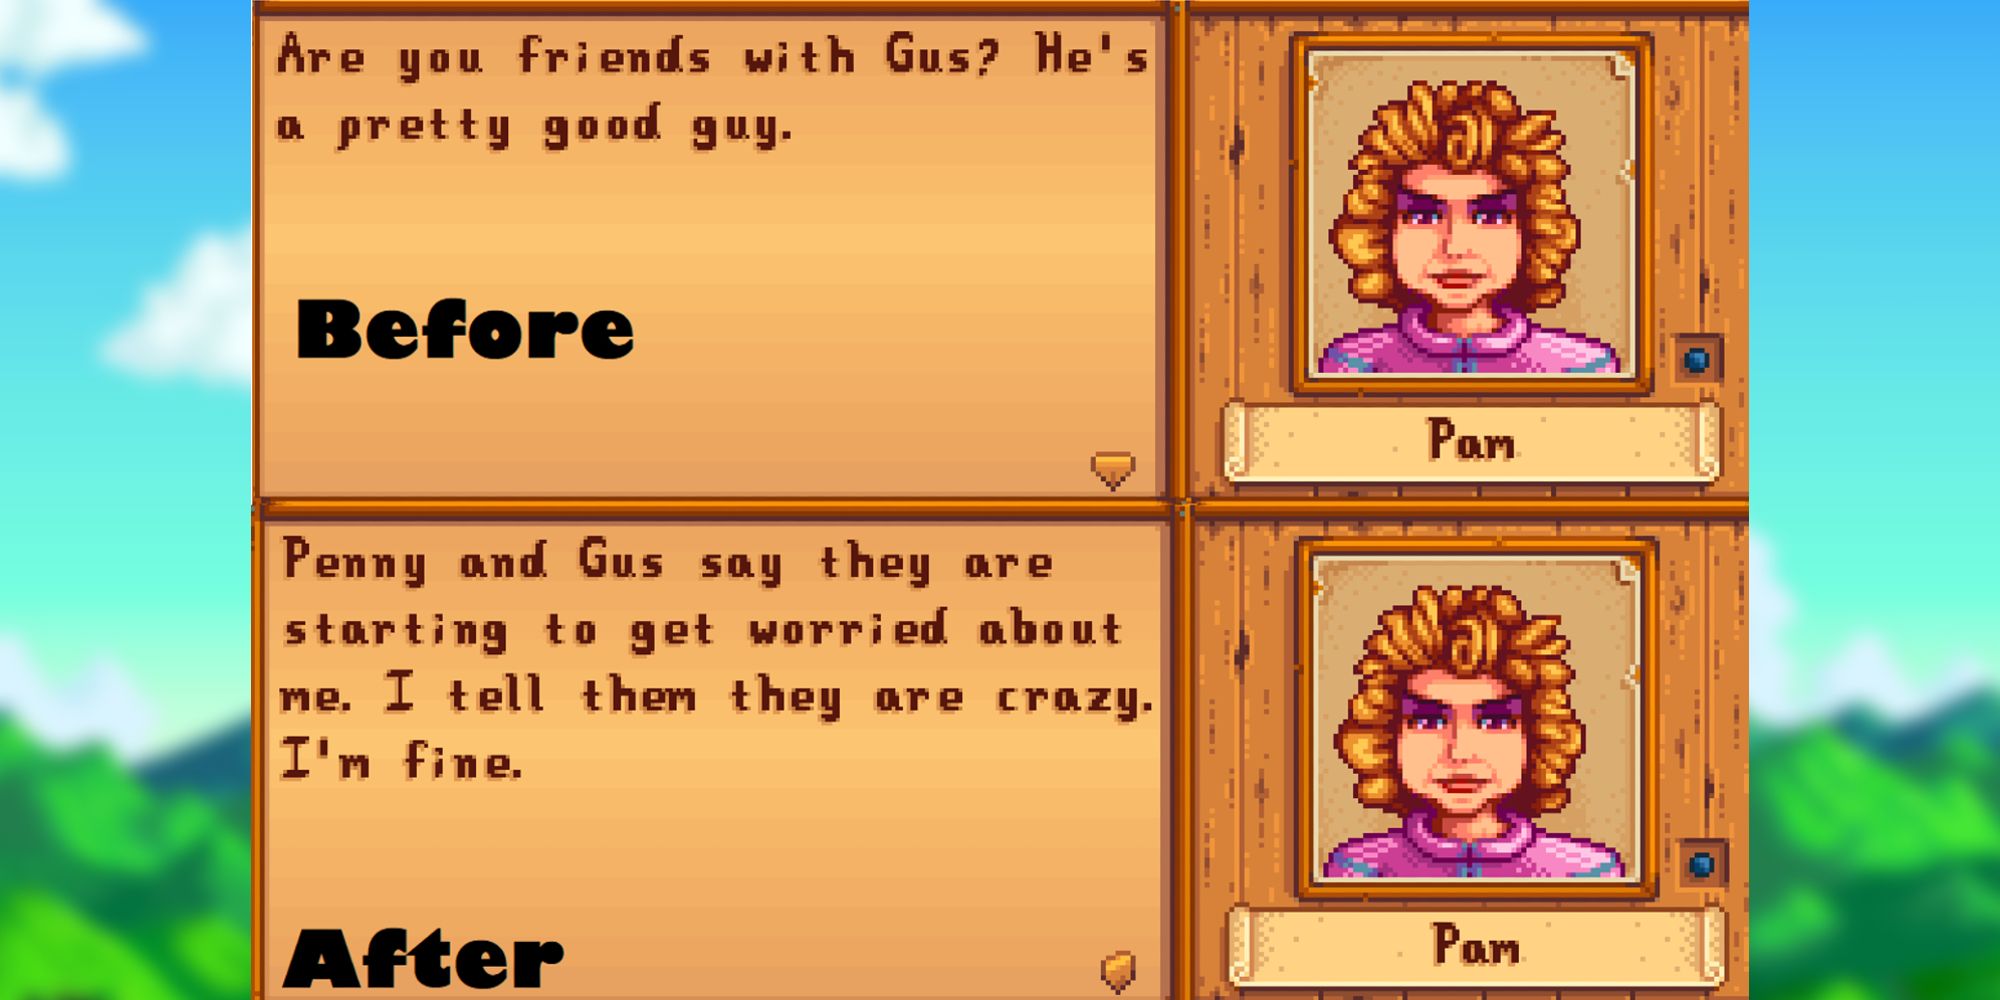 stardew valley pam overhaul mod showing dialogue in vanilla above dialogue with the mod